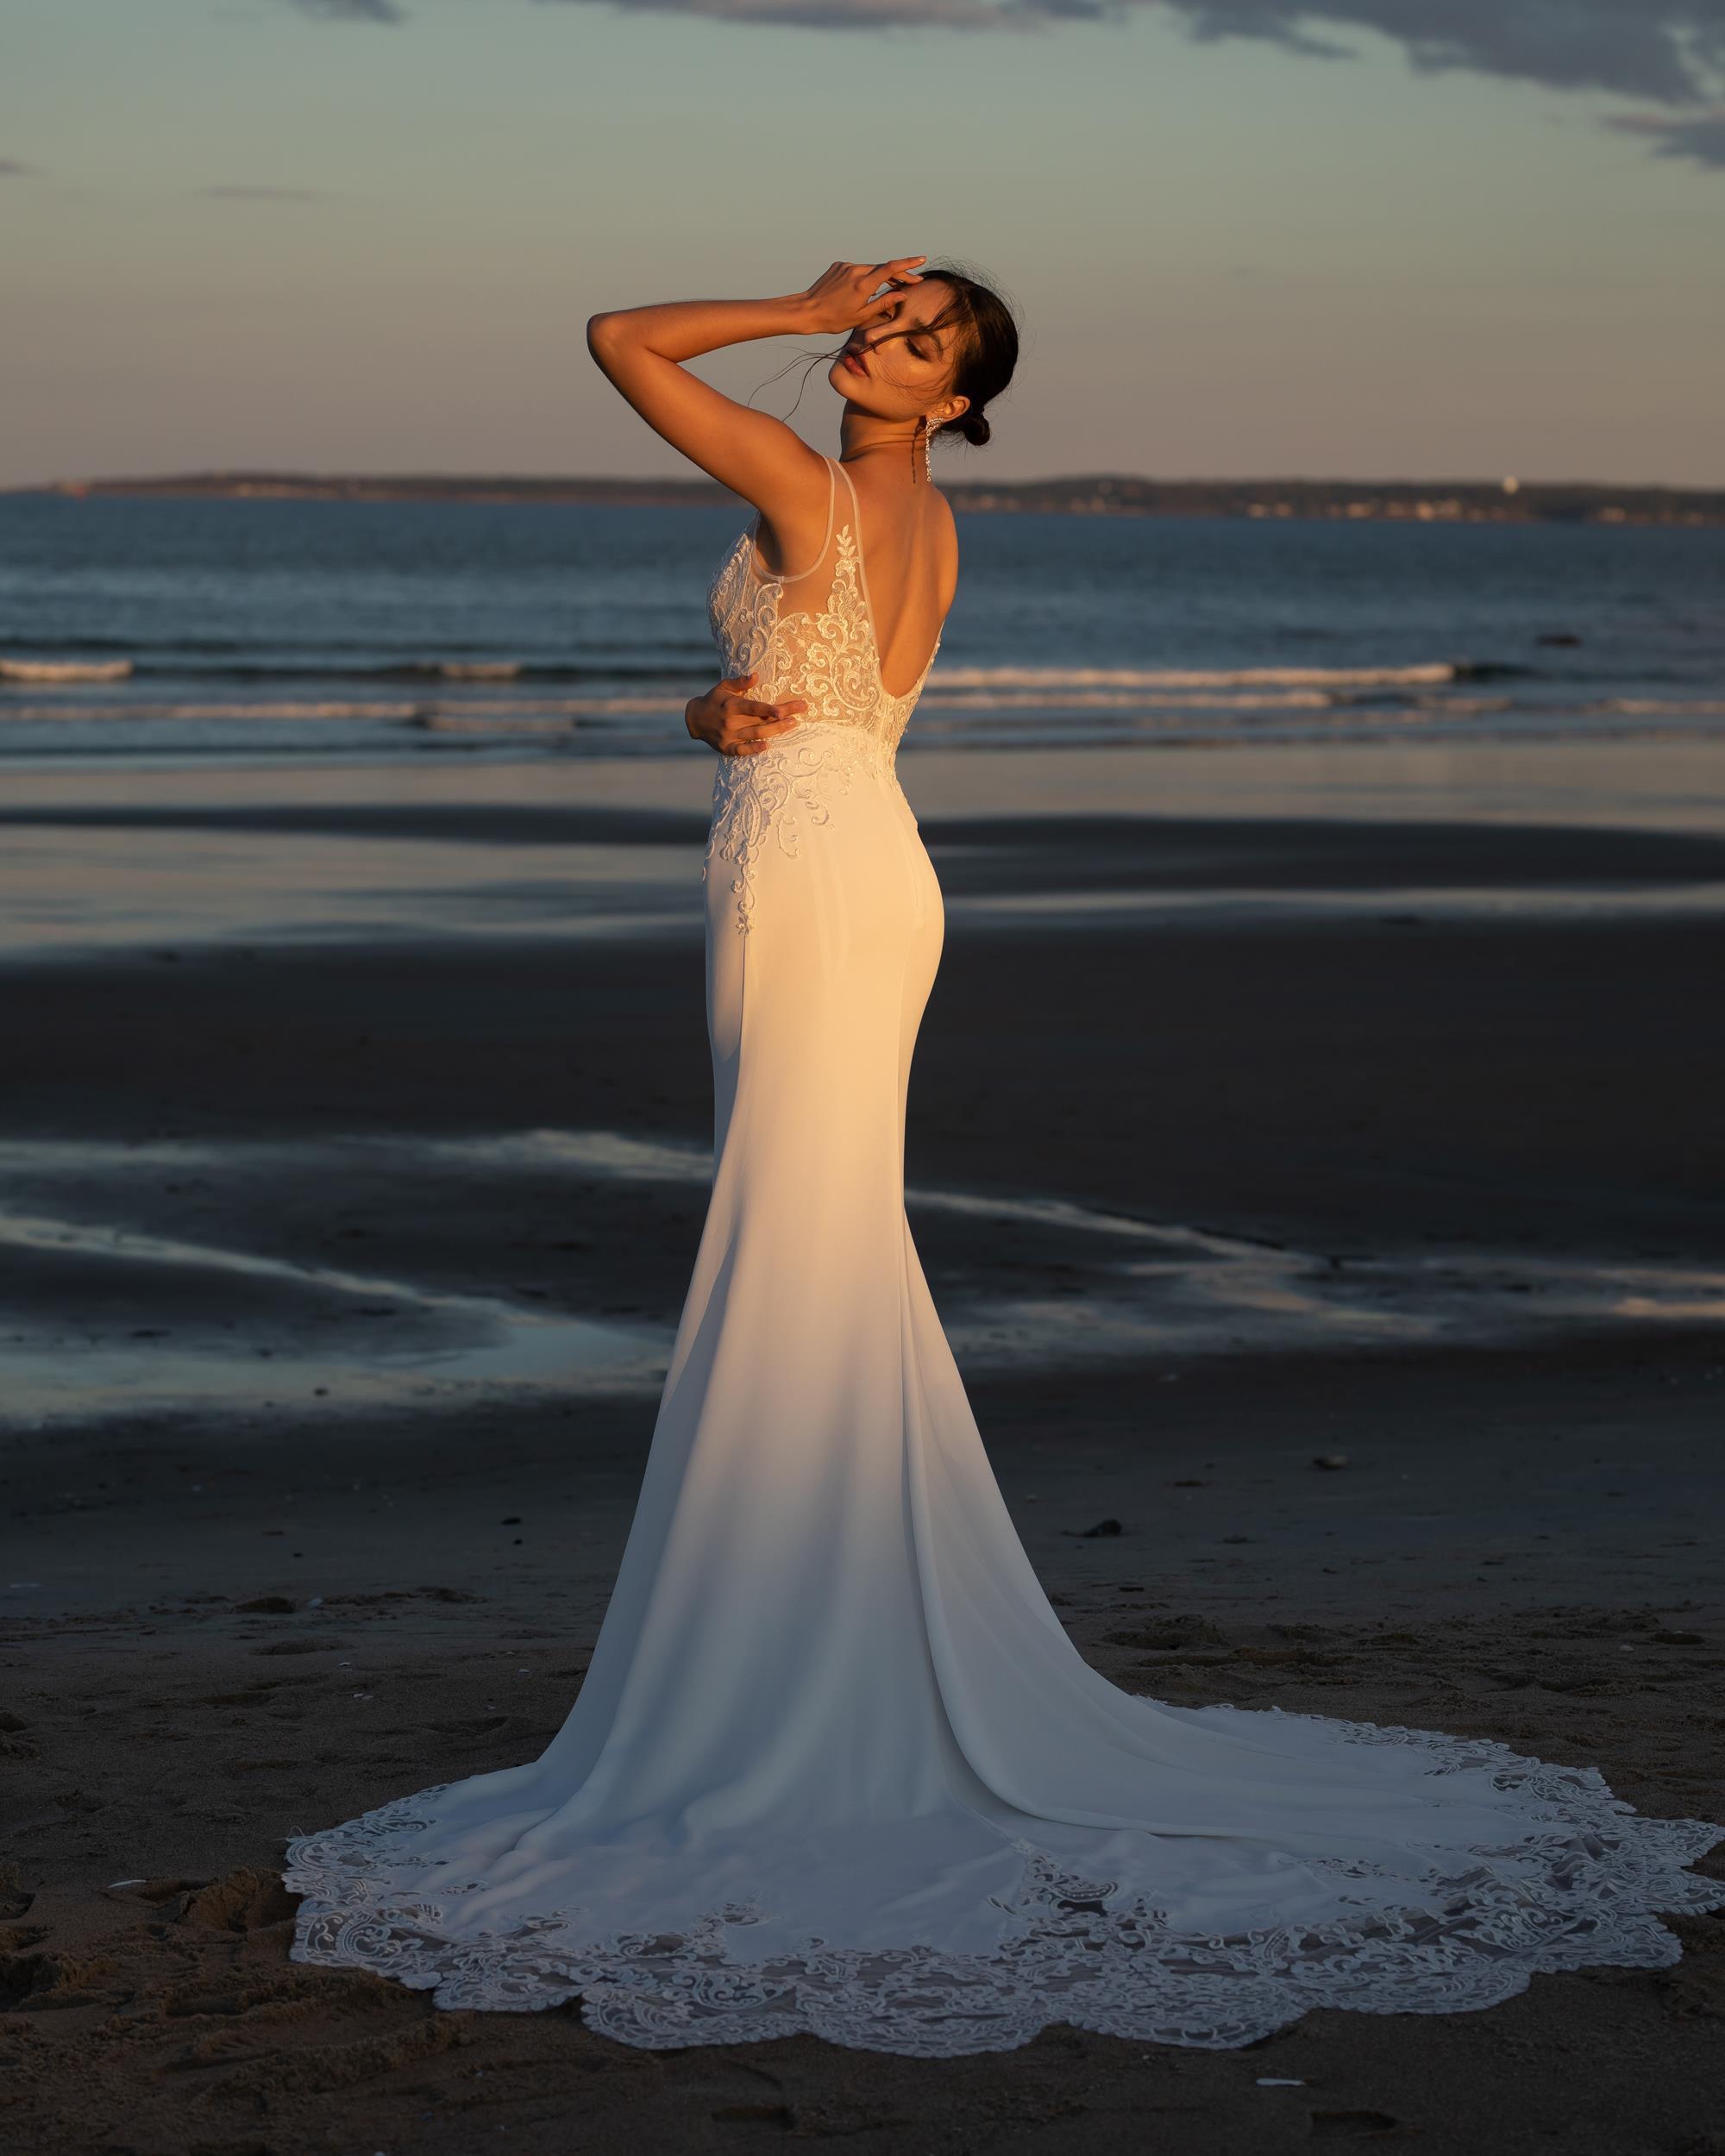 Photo of the model wearing a bridal gown near the beach